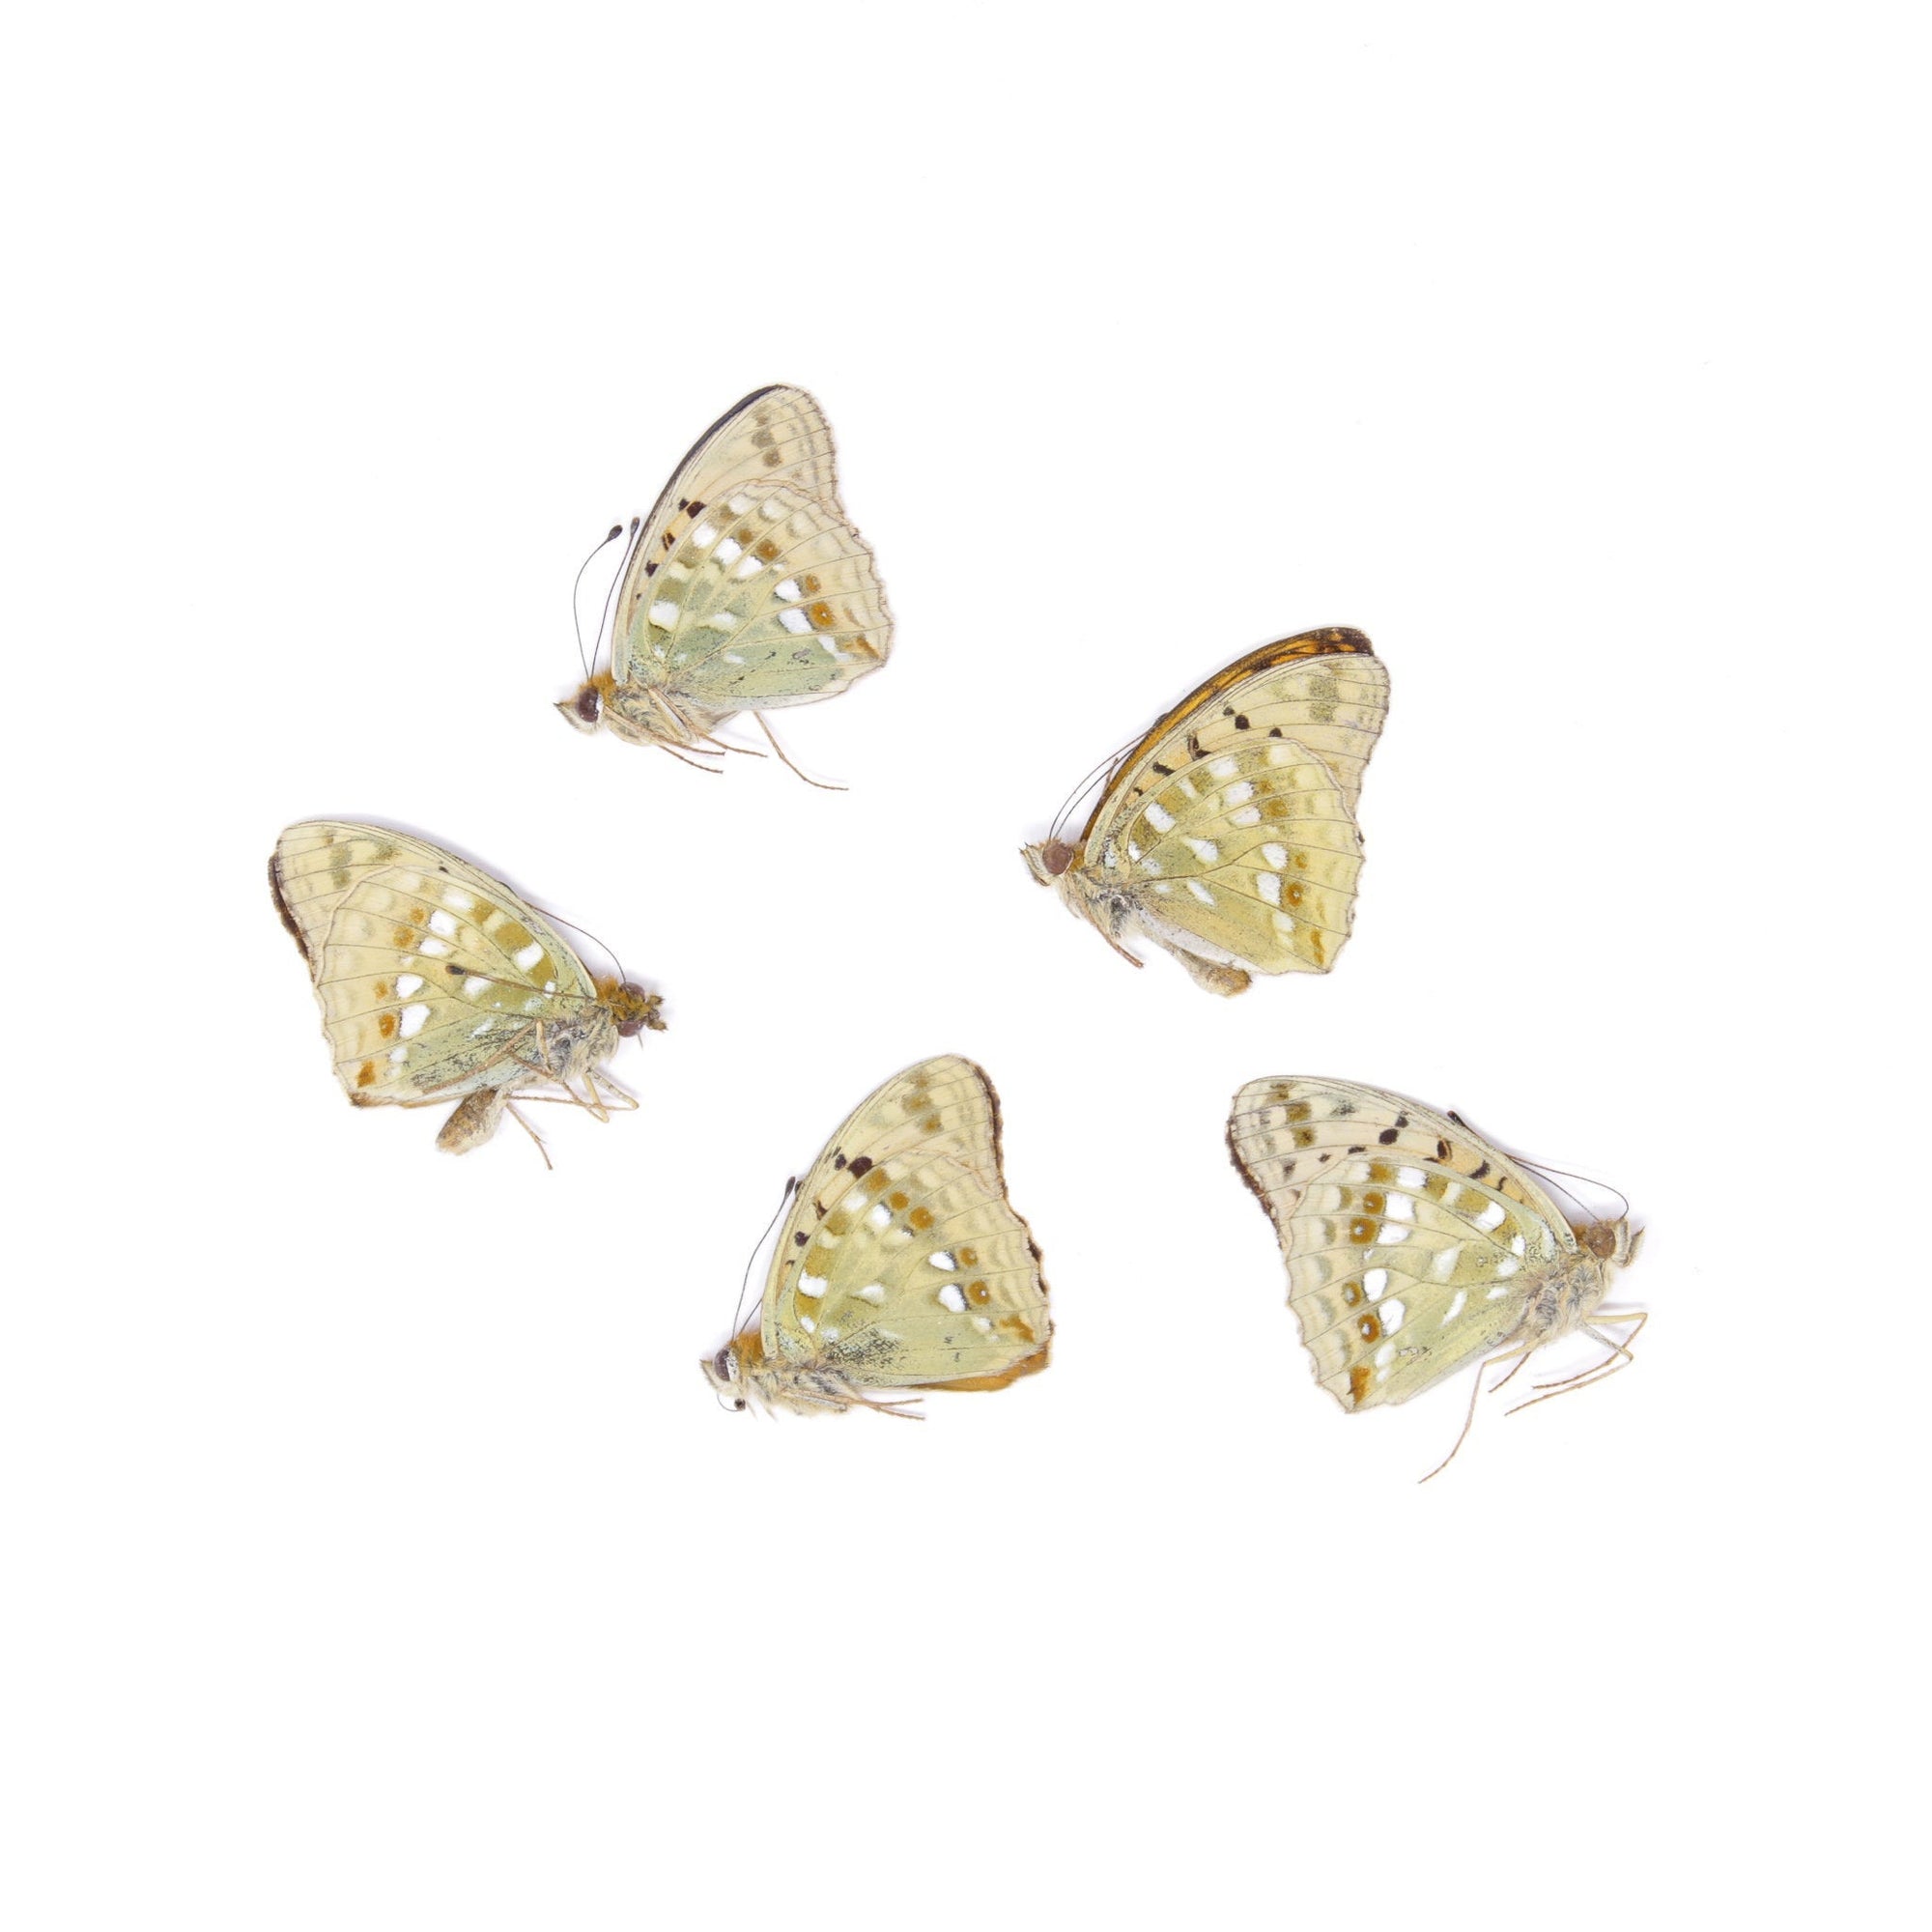 Five (5) High Brown Fritillary, Argynnis adippe, Unmounted Papered Butterflies, Specimens for Collecting, Art, Entomology